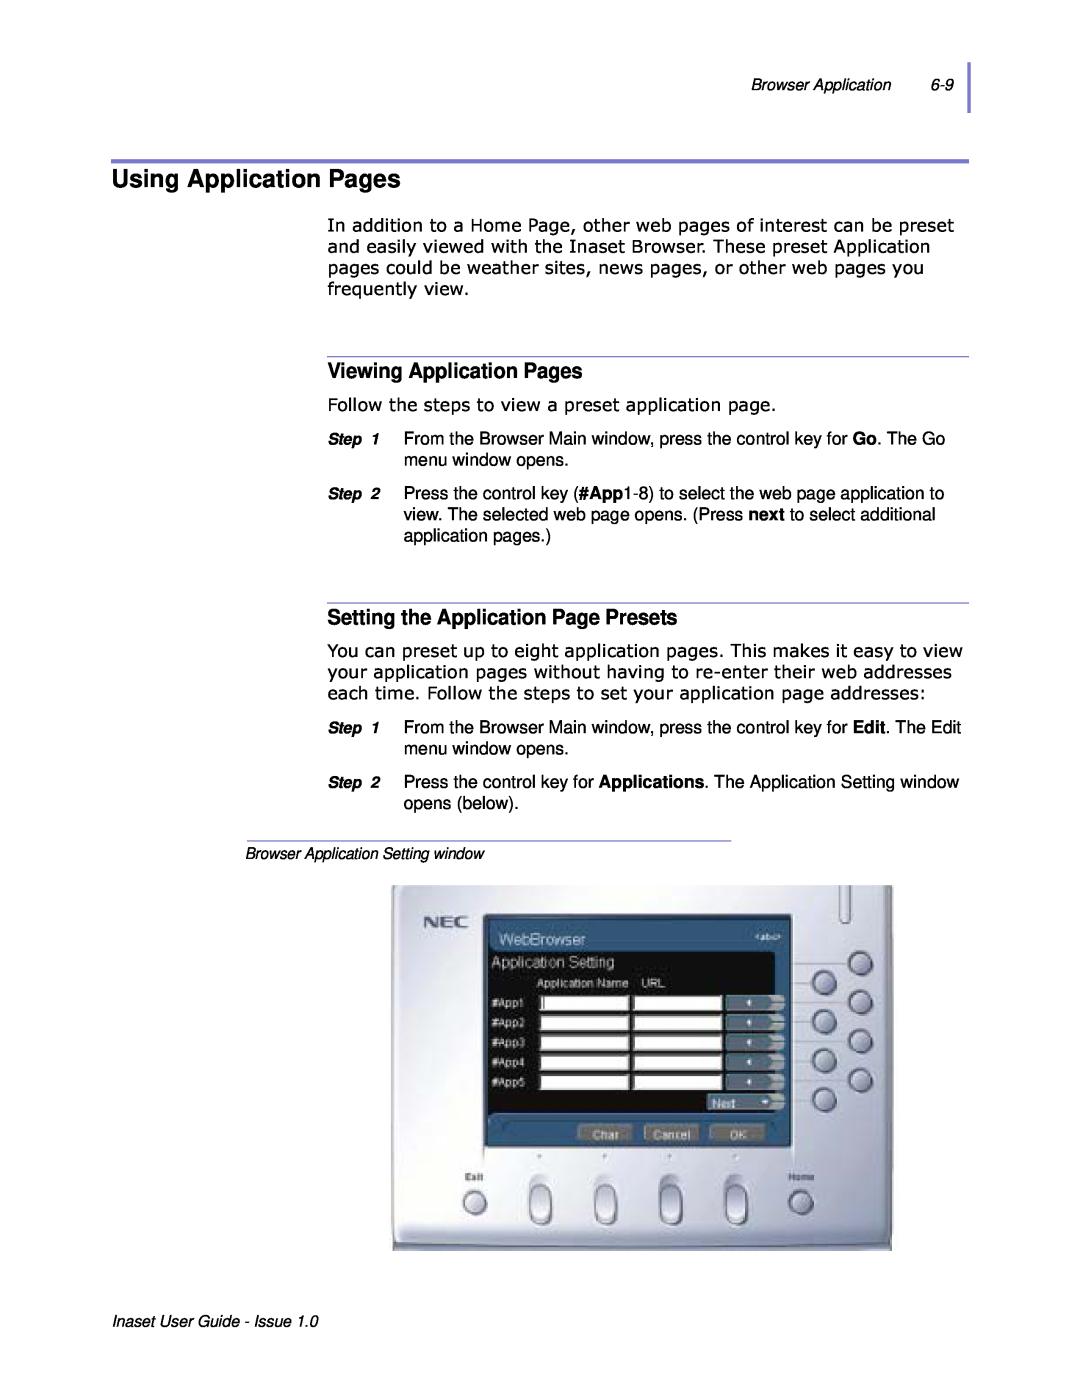 NEC NEAX 2000 IPS manual Using Application Pages, Viewing Application Pages, Setting the Application Page Presets 